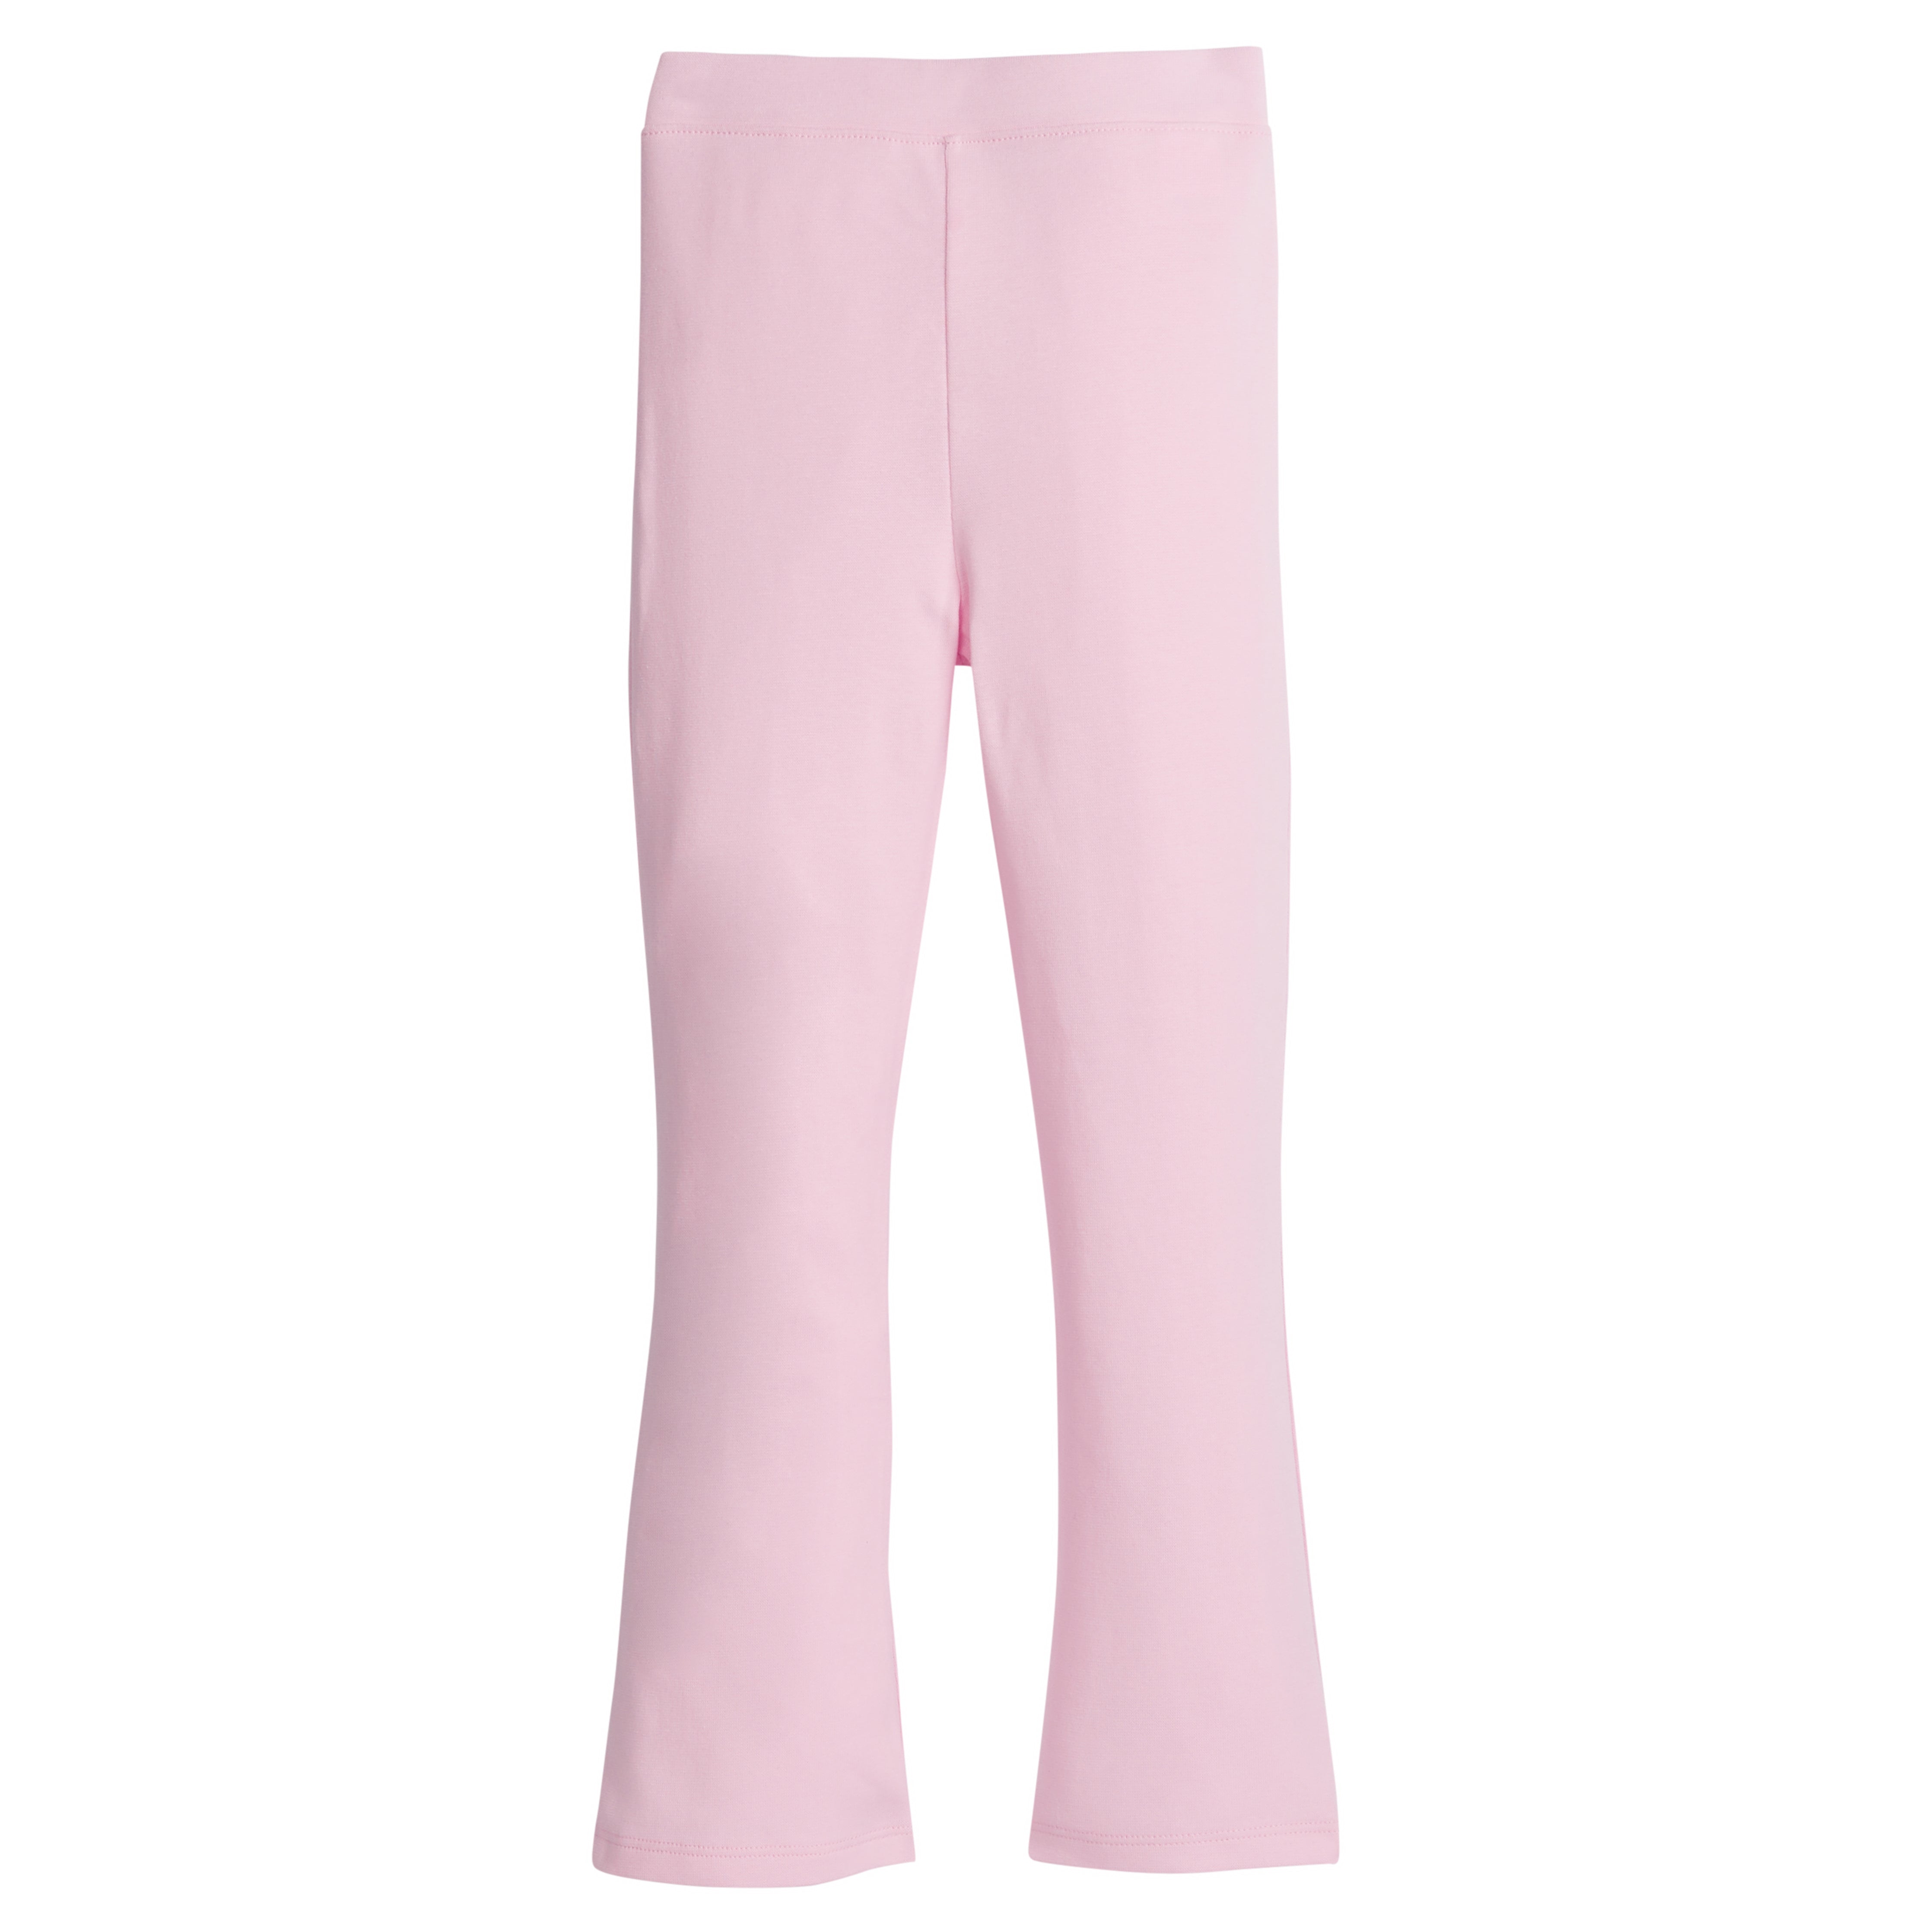 Girls Pants Pink Legging Butterfly Trousers Children Clothes